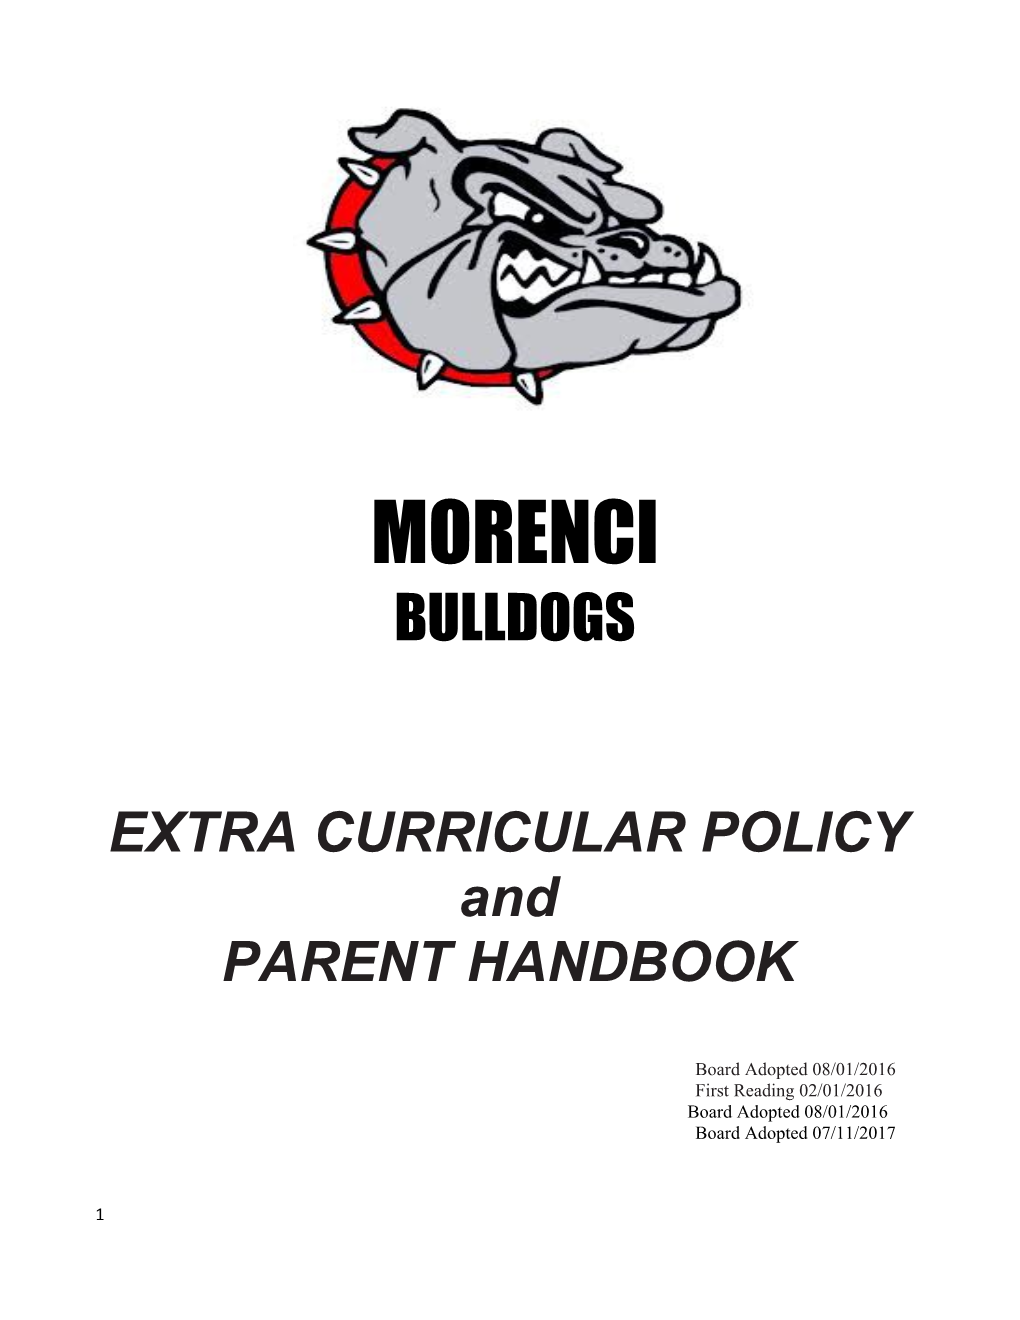 Extra Curricular Policy